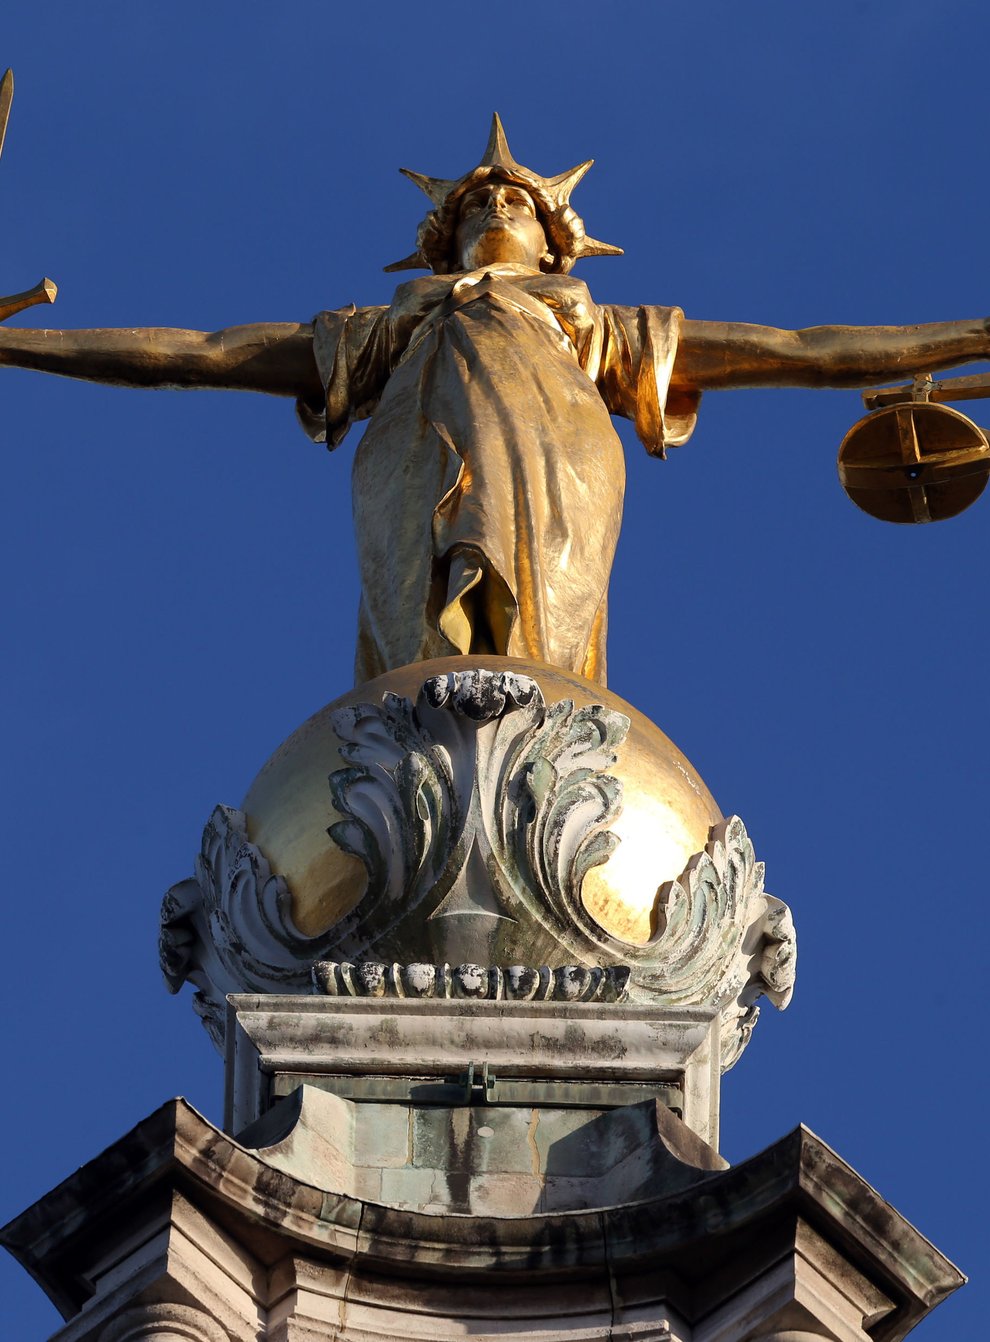 The statue of Lady Justice on top of the Old Bailey